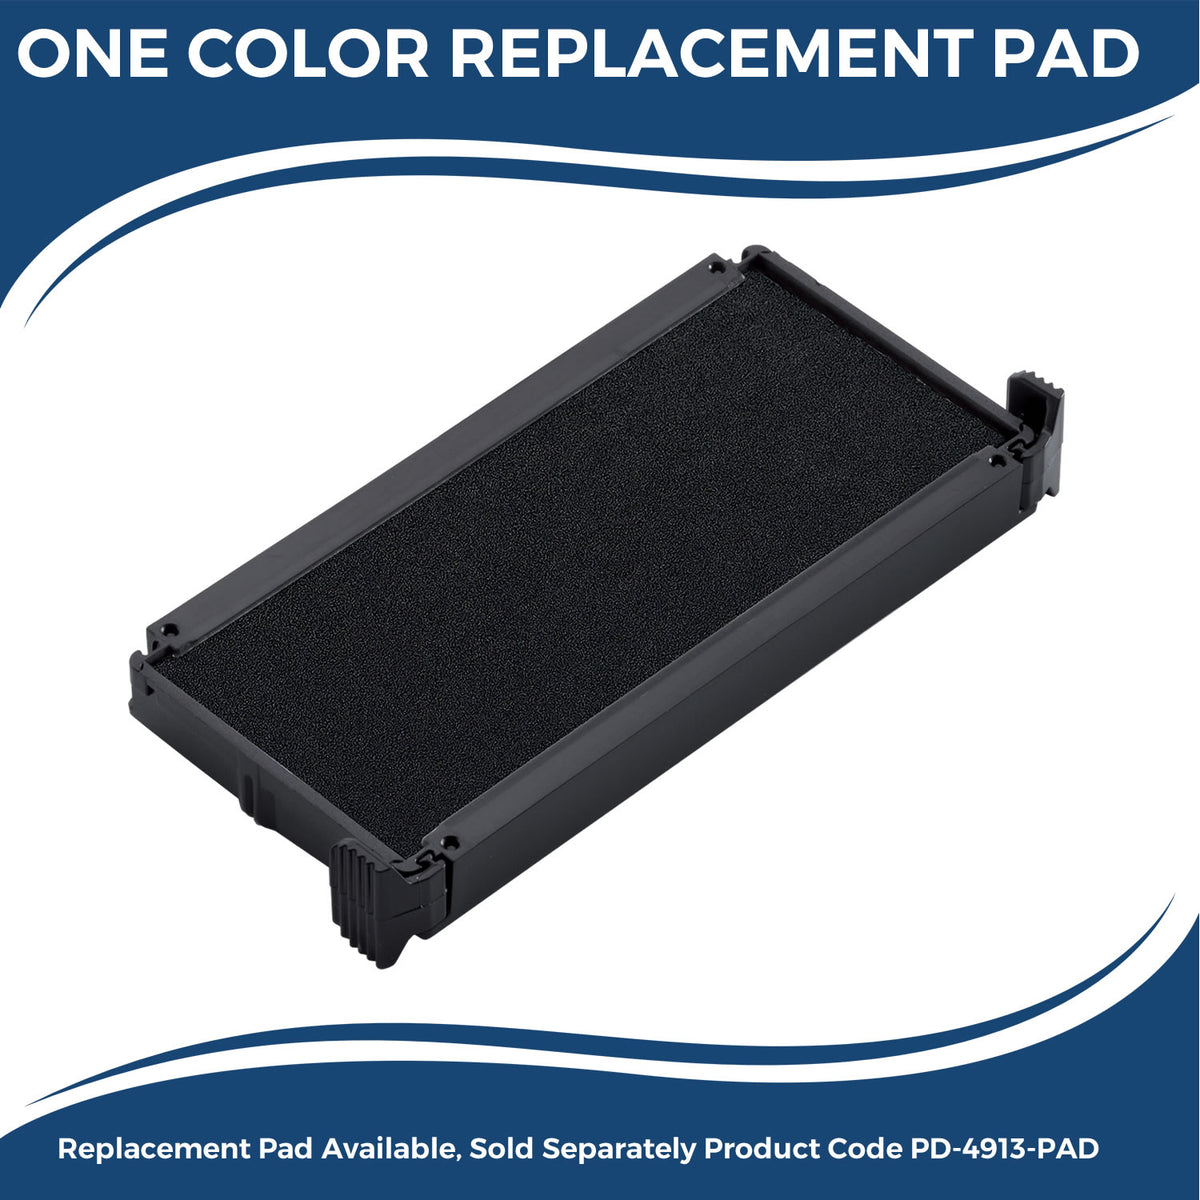 Large Self-Inking Bold Banco Stamp 5517S Large Replacment Pad